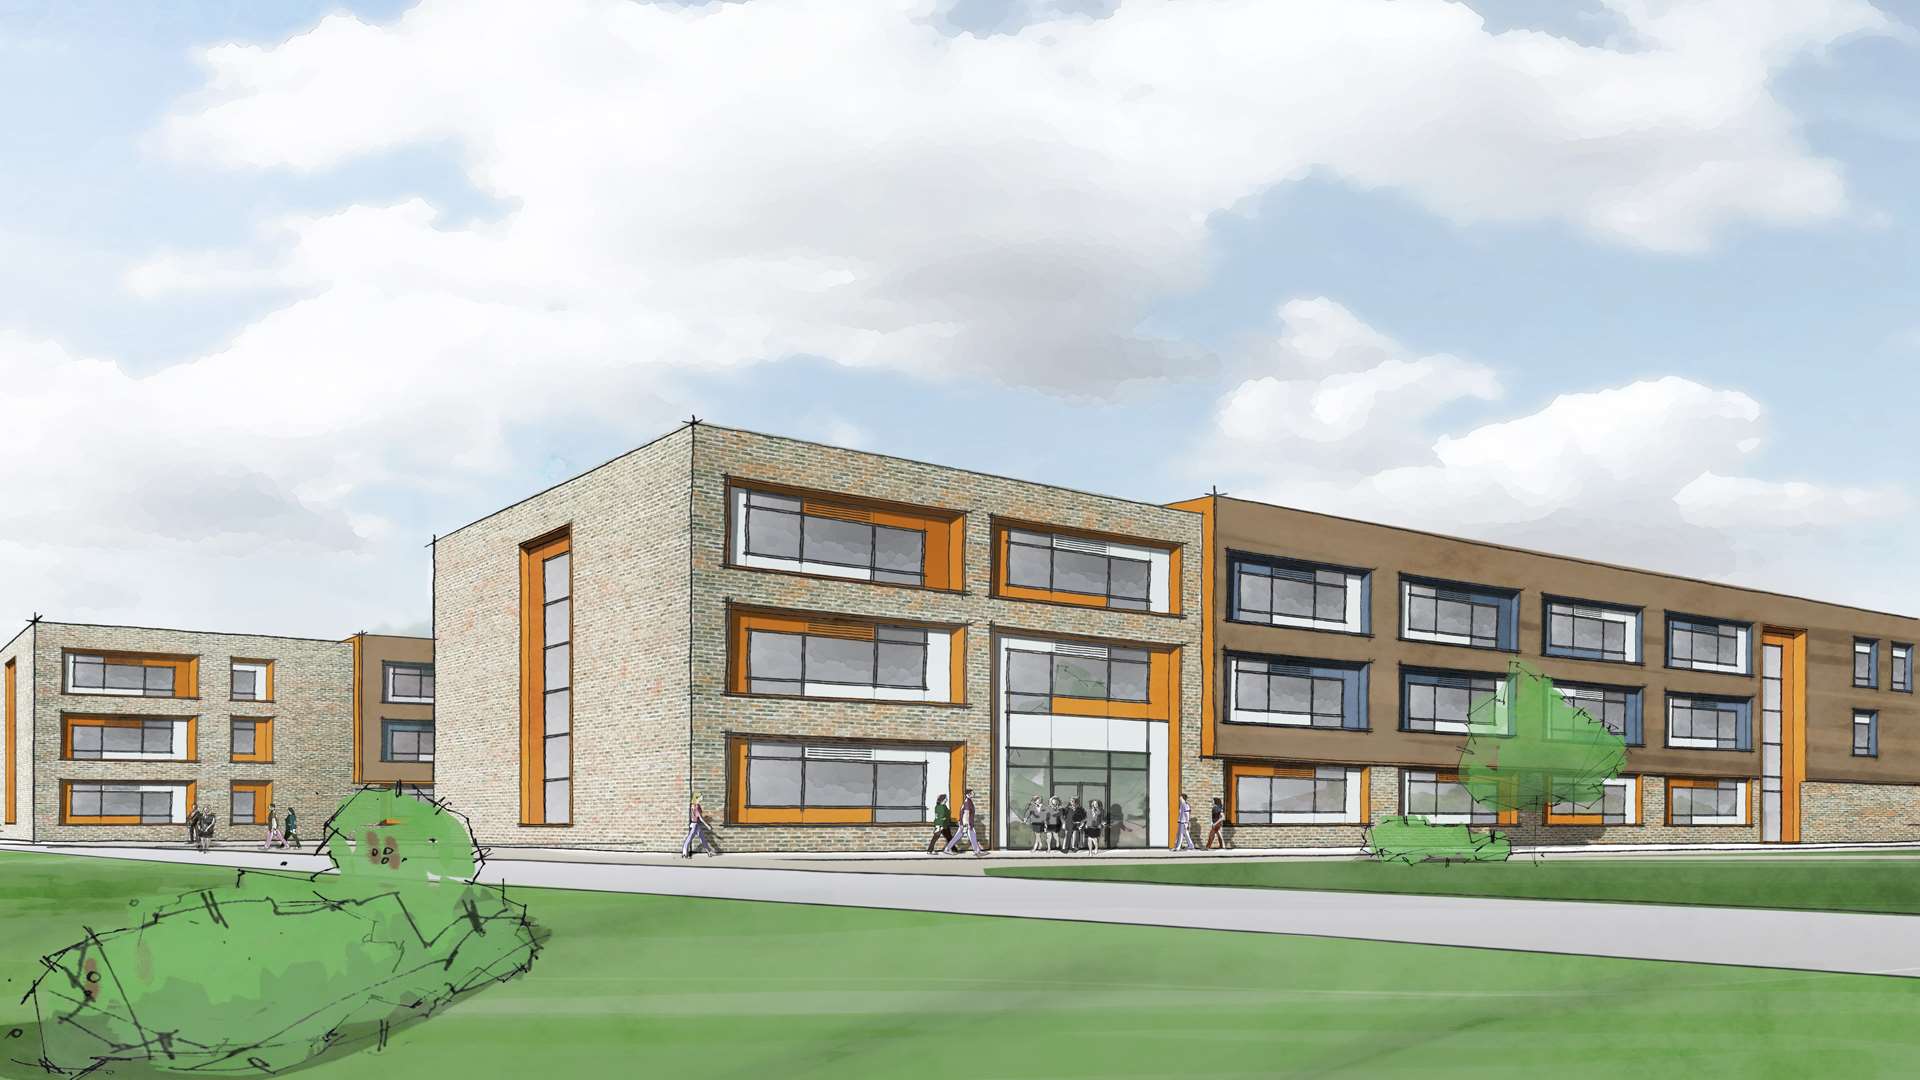 An artists' impression of the Maidstone School of Science and Technology